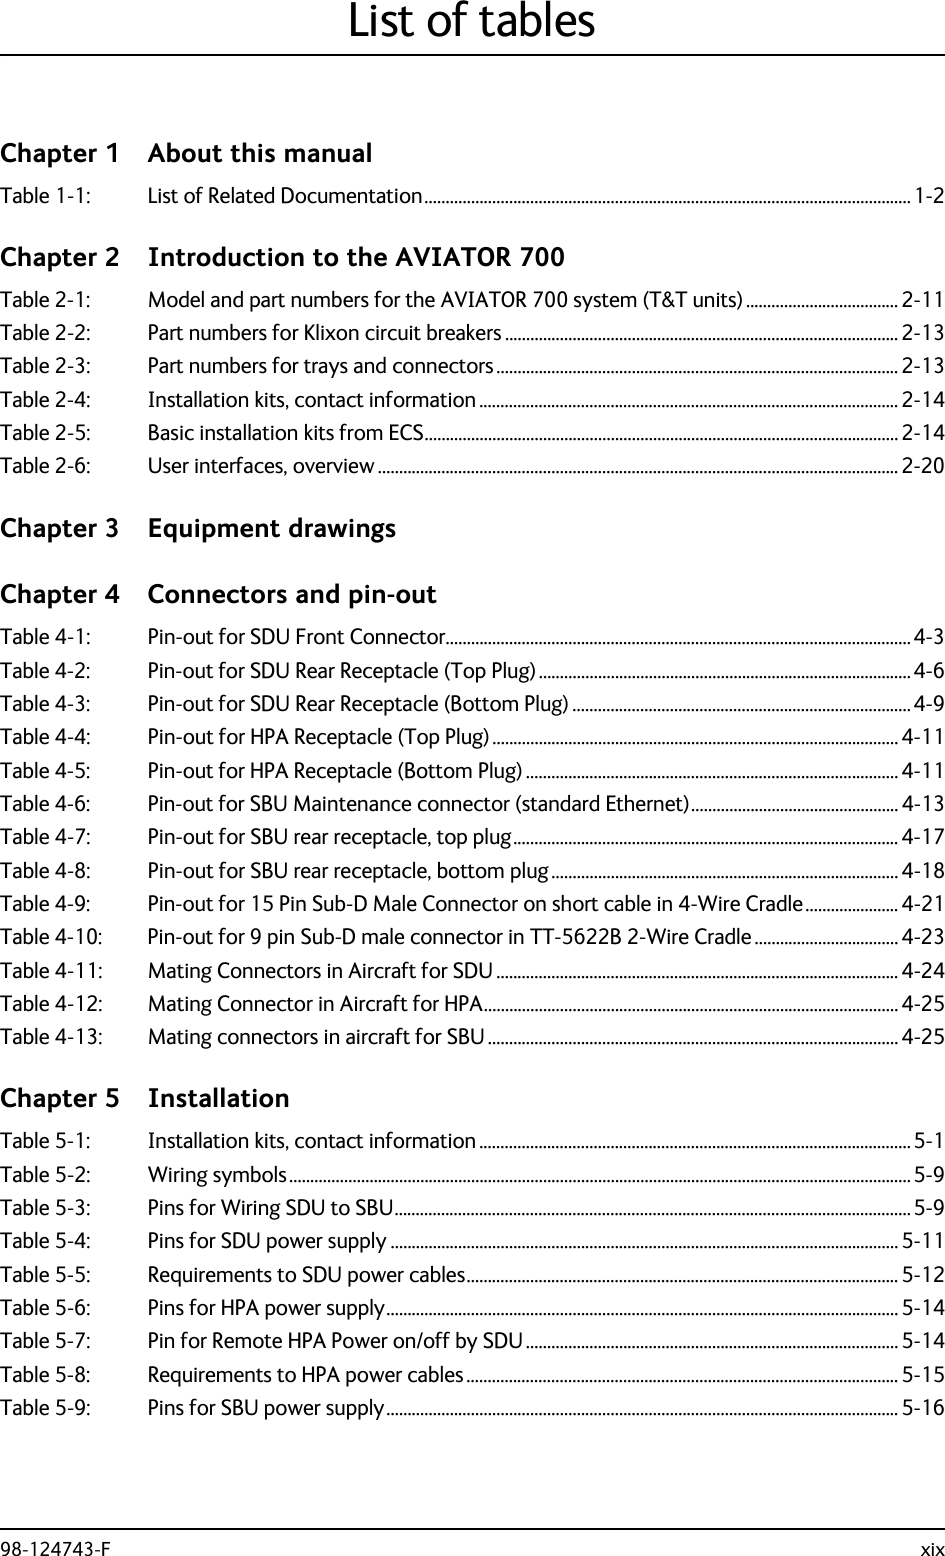 98-124743-F xixList of tablesChapter 1 About this manualTable 1-1: List of Related Documentation...................................................................................................................1-2Chapter 2 Introduction to the AVIATOR 700Table 2-1: Model and part numbers for the AVIATOR 700 system (T&amp;T units).................................... 2-11Table 2-2: Part numbers for Klixon circuit breakers ............................................................................................. 2-13Table 2-3: Part numbers for trays and connectors ............................................................................................... 2-13Table 2-4: Installation kits, contact information ................................................................................................... 2-14Table 2-5: Basic installation kits from ECS................................................................................................................ 2-14Table 2-6: User interfaces, overview ........................................................................................................................... 2-20Chapter 3 Equipment drawingsChapter 4 Connectors and pin-outTable 4-1: Pin-out for SDU Front Connector..............................................................................................................4-3Table 4-2: Pin-out for SDU Rear Receptacle (Top Plug) ........................................................................................4-6Table 4-3: Pin-out for SDU Rear Receptacle (Bottom Plug) ................................................................................4-9Table 4-4: Pin-out for HPA Receptacle (Top Plug)................................................................................................ 4-11Table 4-5: Pin-out for HPA Receptacle (Bottom Plug) ........................................................................................ 4-11Table 4-6: Pin-out for SBU Maintenance connector (standard Ethernet)................................................. 4-13Table 4-7: Pin-out for SBU rear receptacle, top plug........................................................................................... 4-17Table 4-8: Pin-out for SBU rear receptacle, bottom plug .................................................................................. 4-18Table 4-9: Pin-out for 15 Pin Sub-D Male Connector on short cable in 4-Wire Cradle...................... 4-21Table 4-10: Pin-out for 9 pin Sub-D male connector in TT-5622B 2-Wire Cradle.................................. 4-23Table 4-11: Mating Connectors in Aircraft for SDU ............................................................................................... 4-24Table 4-12: Mating Connector in Aircraft for HPA.................................................................................................. 4-25Table 4-13: Mating connectors in aircraft for SBU ................................................................................................. 4-25Chapter 5 InstallationTable 5-1: Installation kits, contact information ...................................................................................................... 5-1Table 5-2: Wiring symbols...................................................................................................................................................5-9Table 5-3: Pins for Wiring SDU to SBU.......................................................................................................................... 5-9Table 5-4: Pins for SDU power supply ........................................................................................................................ 5-11Table 5-5: Requirements to SDU power cables...................................................................................................... 5-12Table 5-6: Pins for HPA power supply......................................................................................................................... 5-14Table 5-7: Pin for Remote HPA Power on/off by SDU ........................................................................................ 5-14Table 5-8: Requirements to HPA power cables ...................................................................................................... 5-15Table 5-9: Pins for SBU power supply......................................................................................................................... 5-16